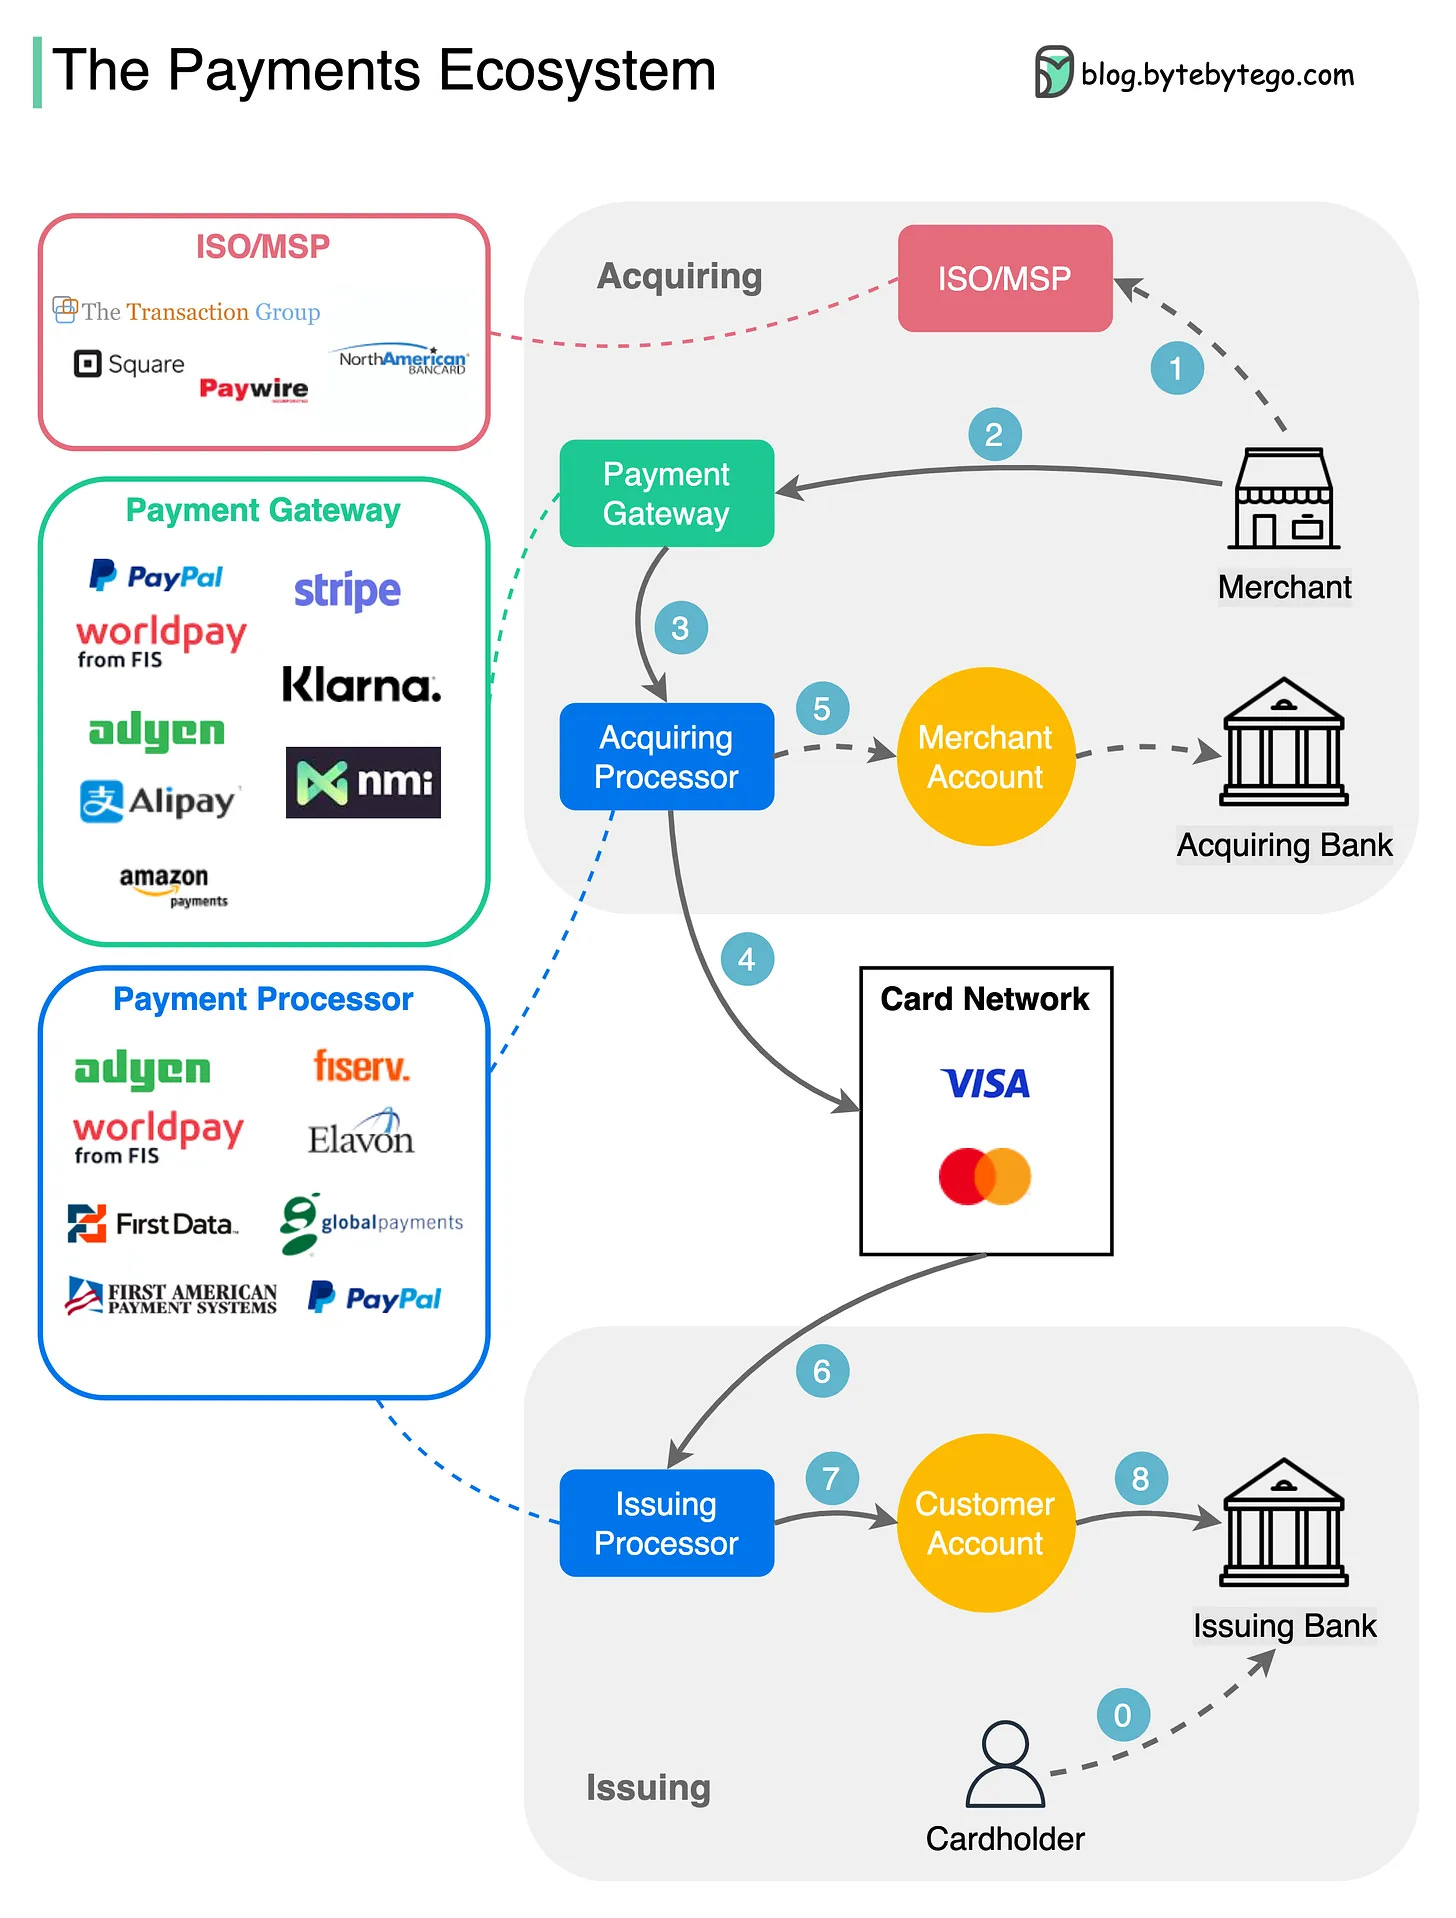 The Payment Ecosystem